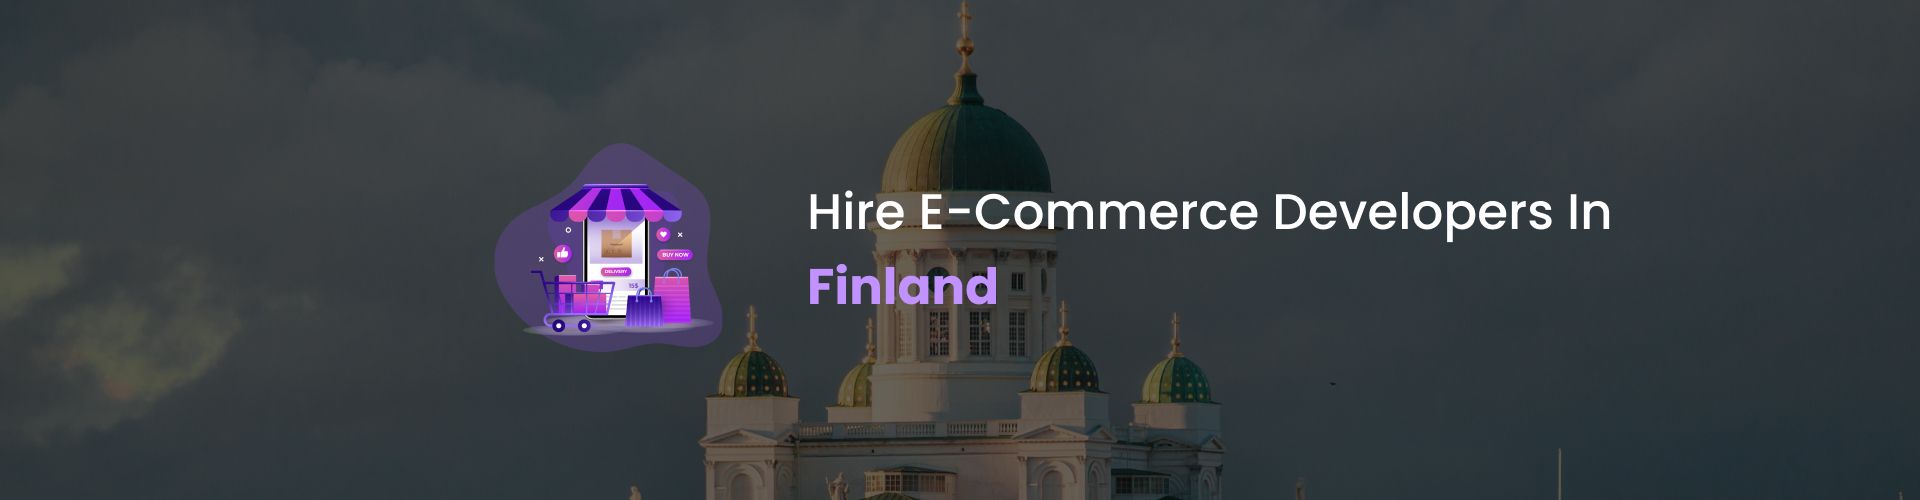 ecommerce developers finland